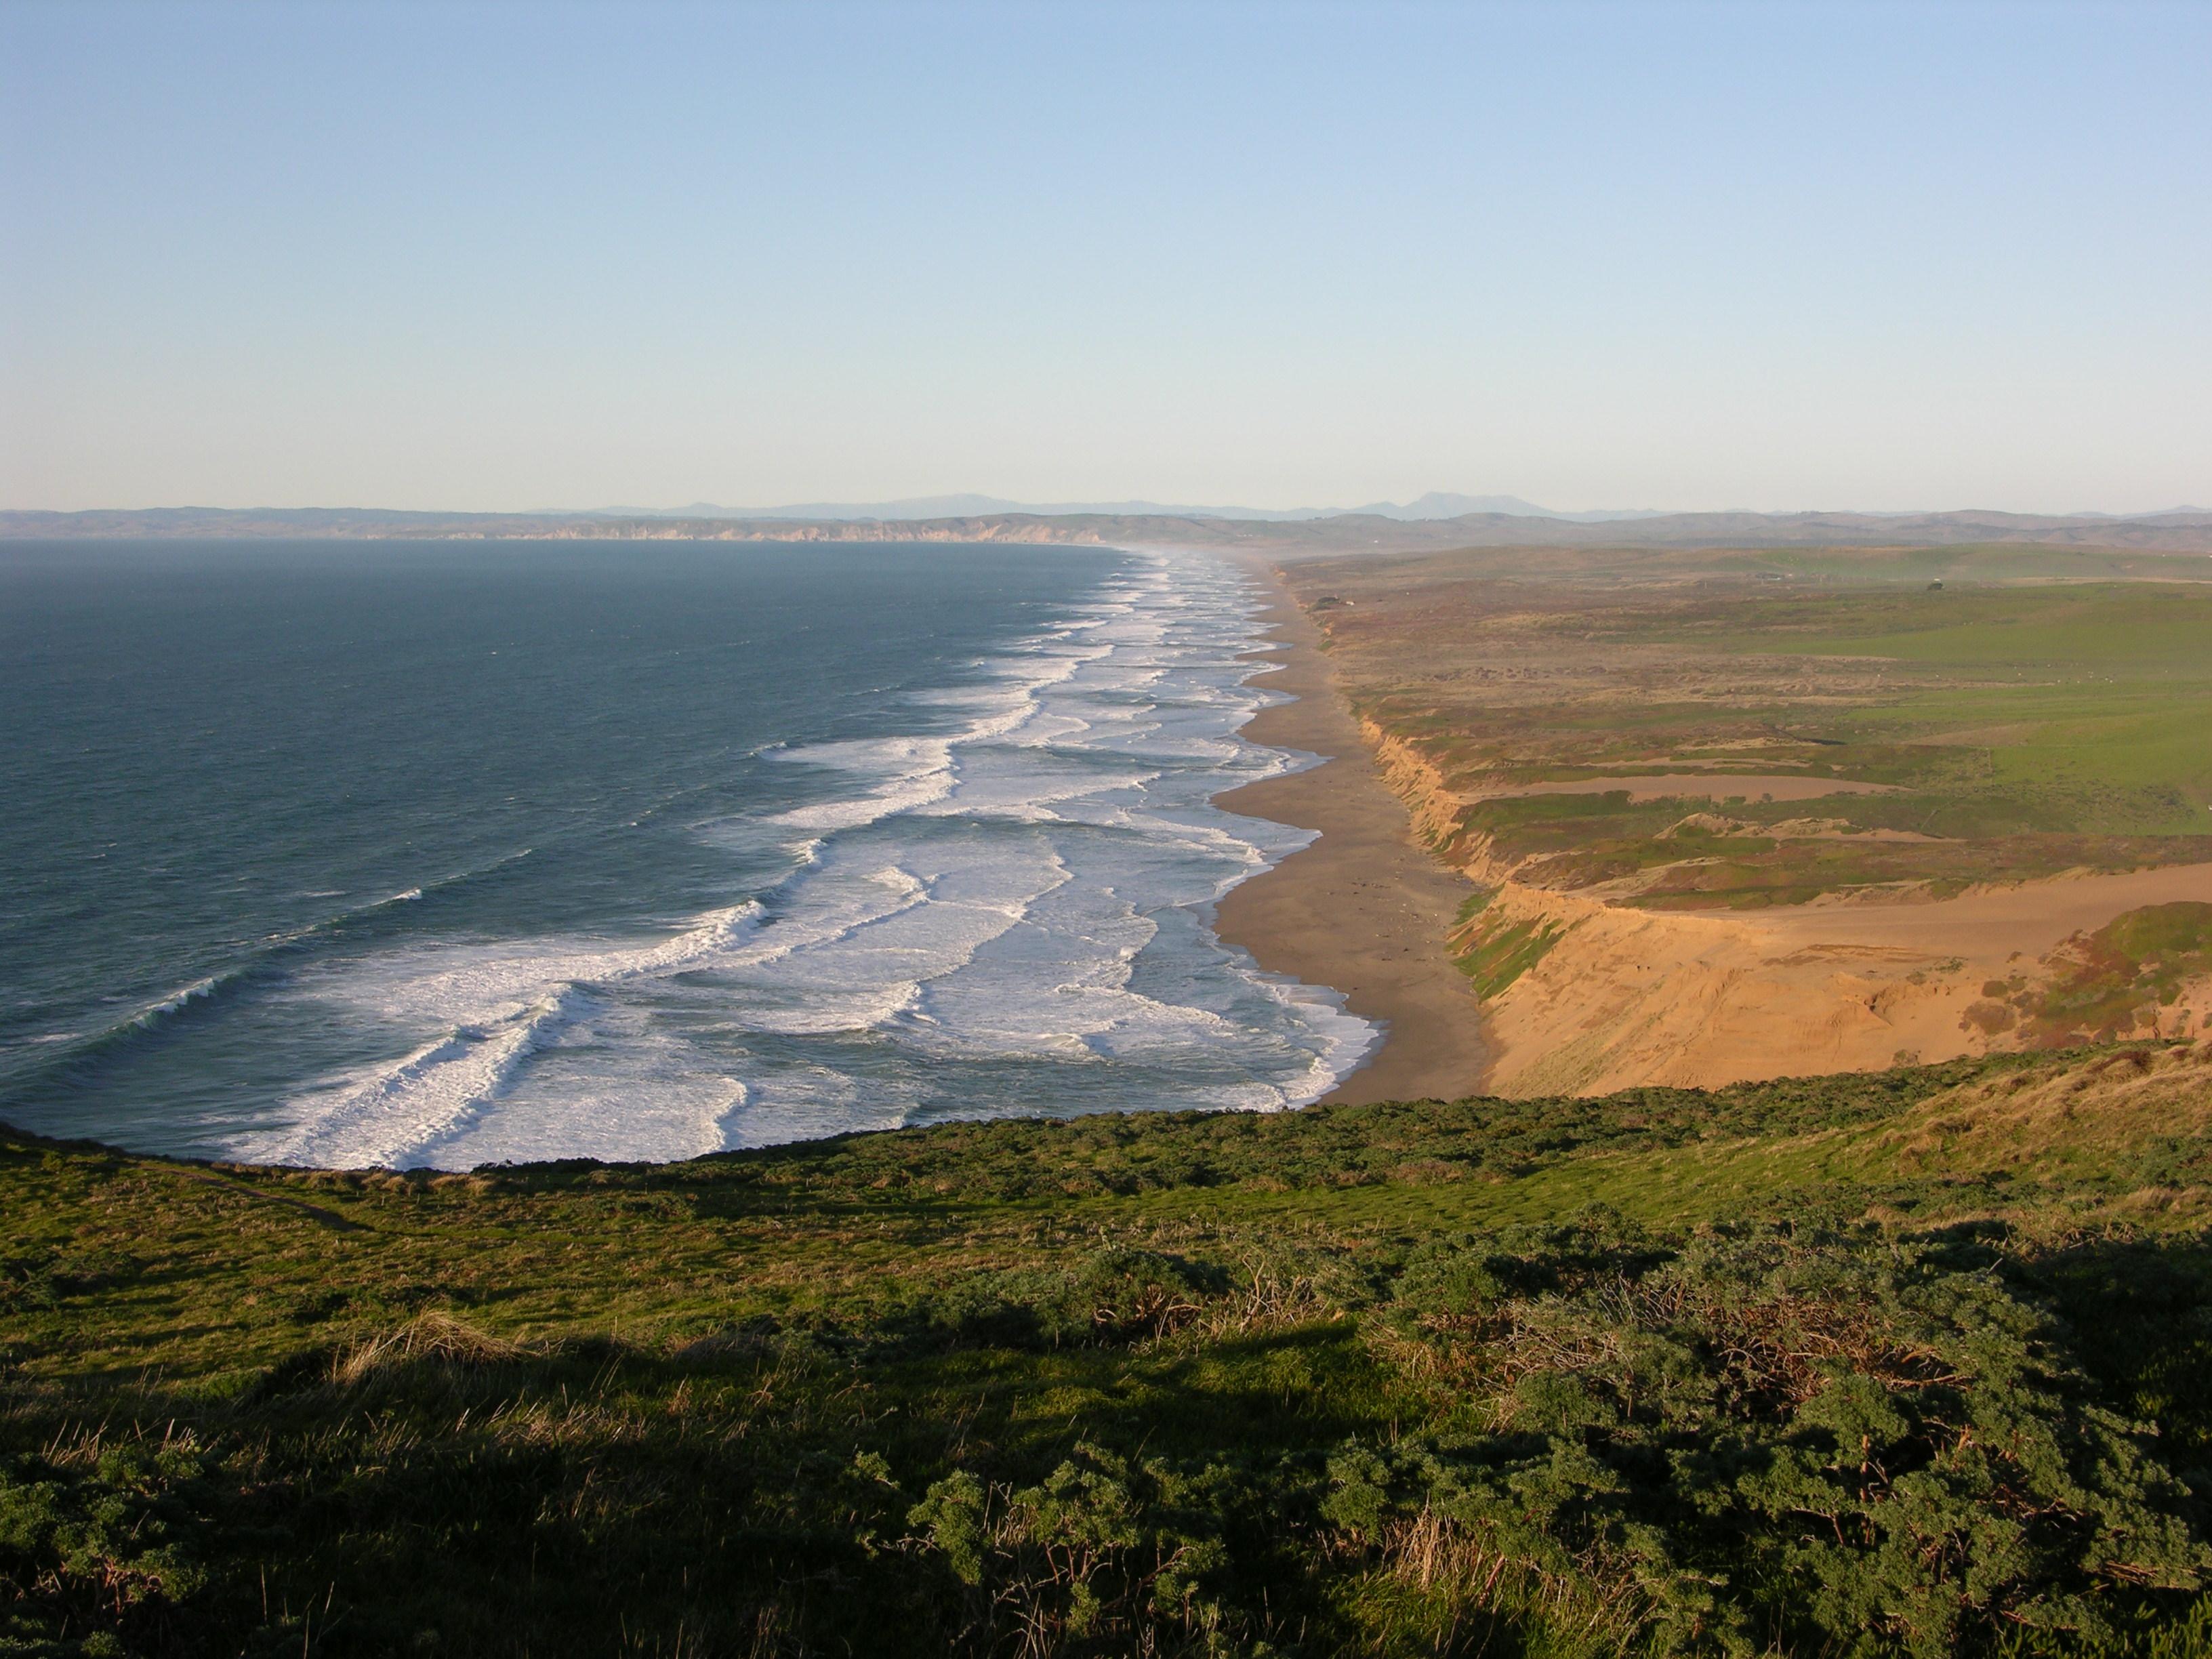 Point Reyes National Seashore - Point Reyes Beach and the Pacific Ocean - Credits: NPS Photo